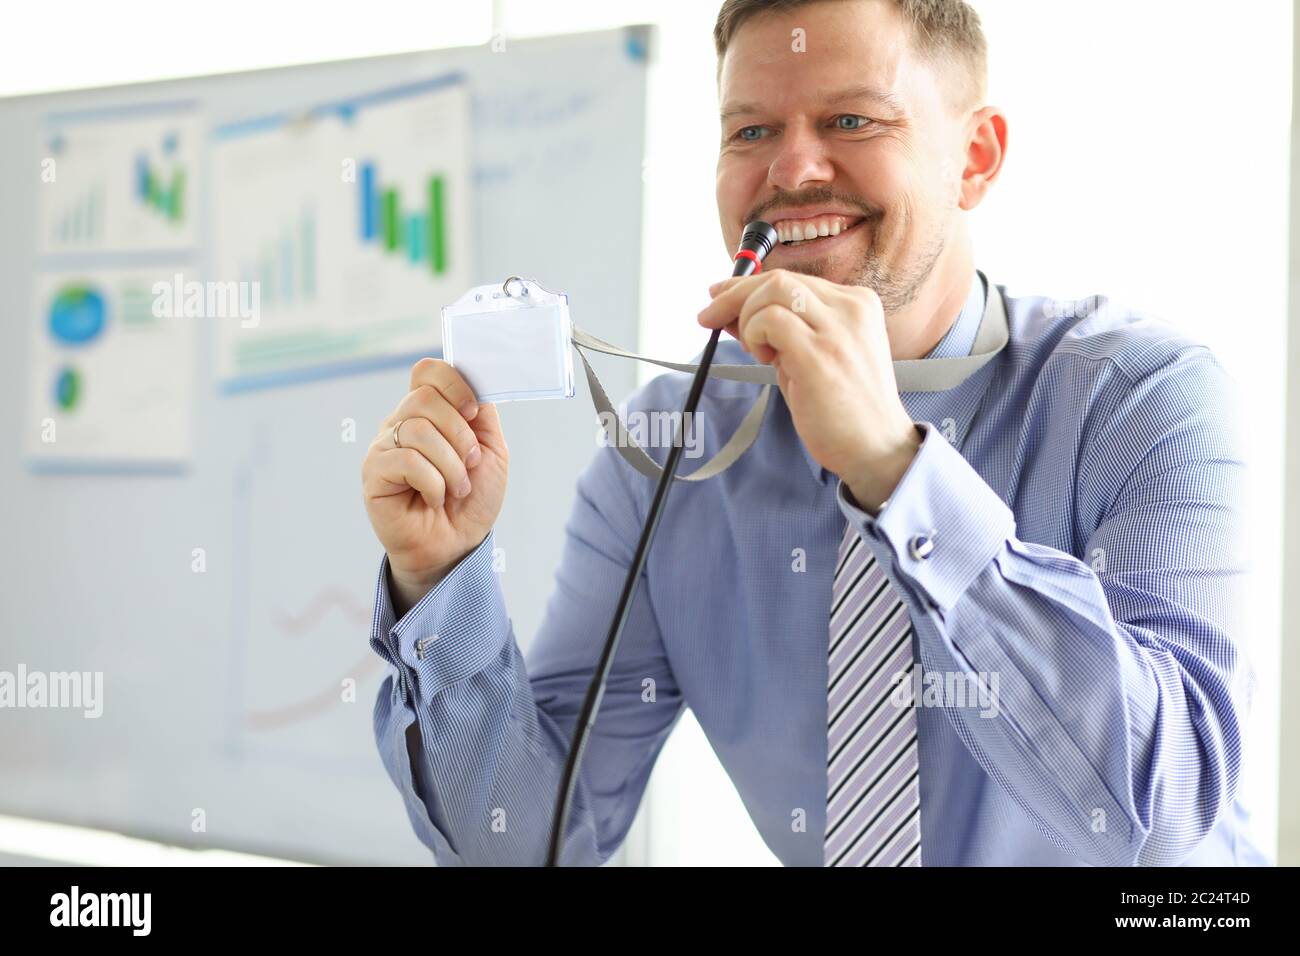 Male person at business meeting Stock Photo